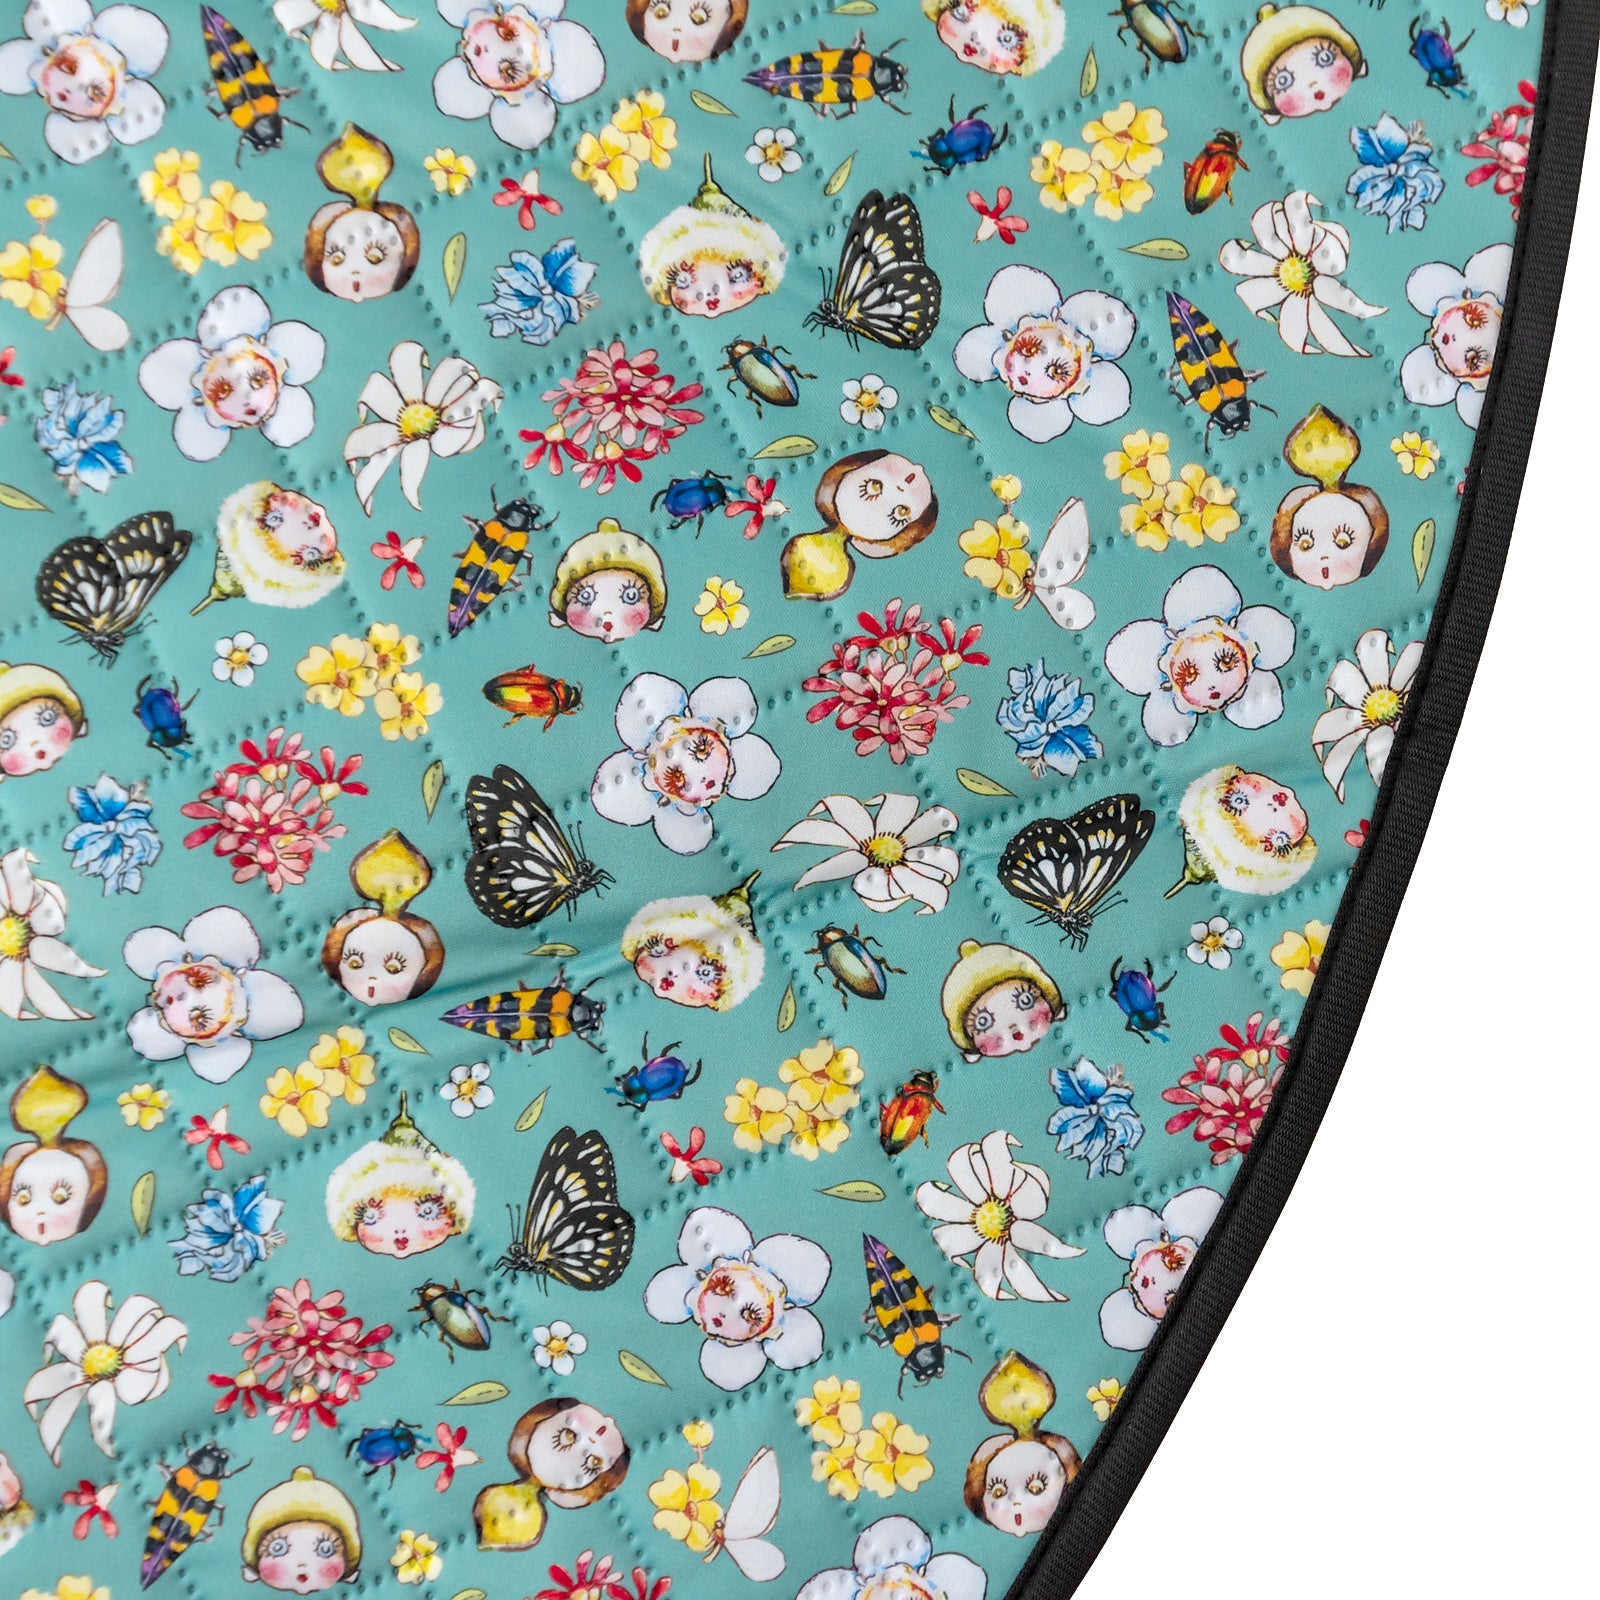 Designer Bums Play Mat Insects